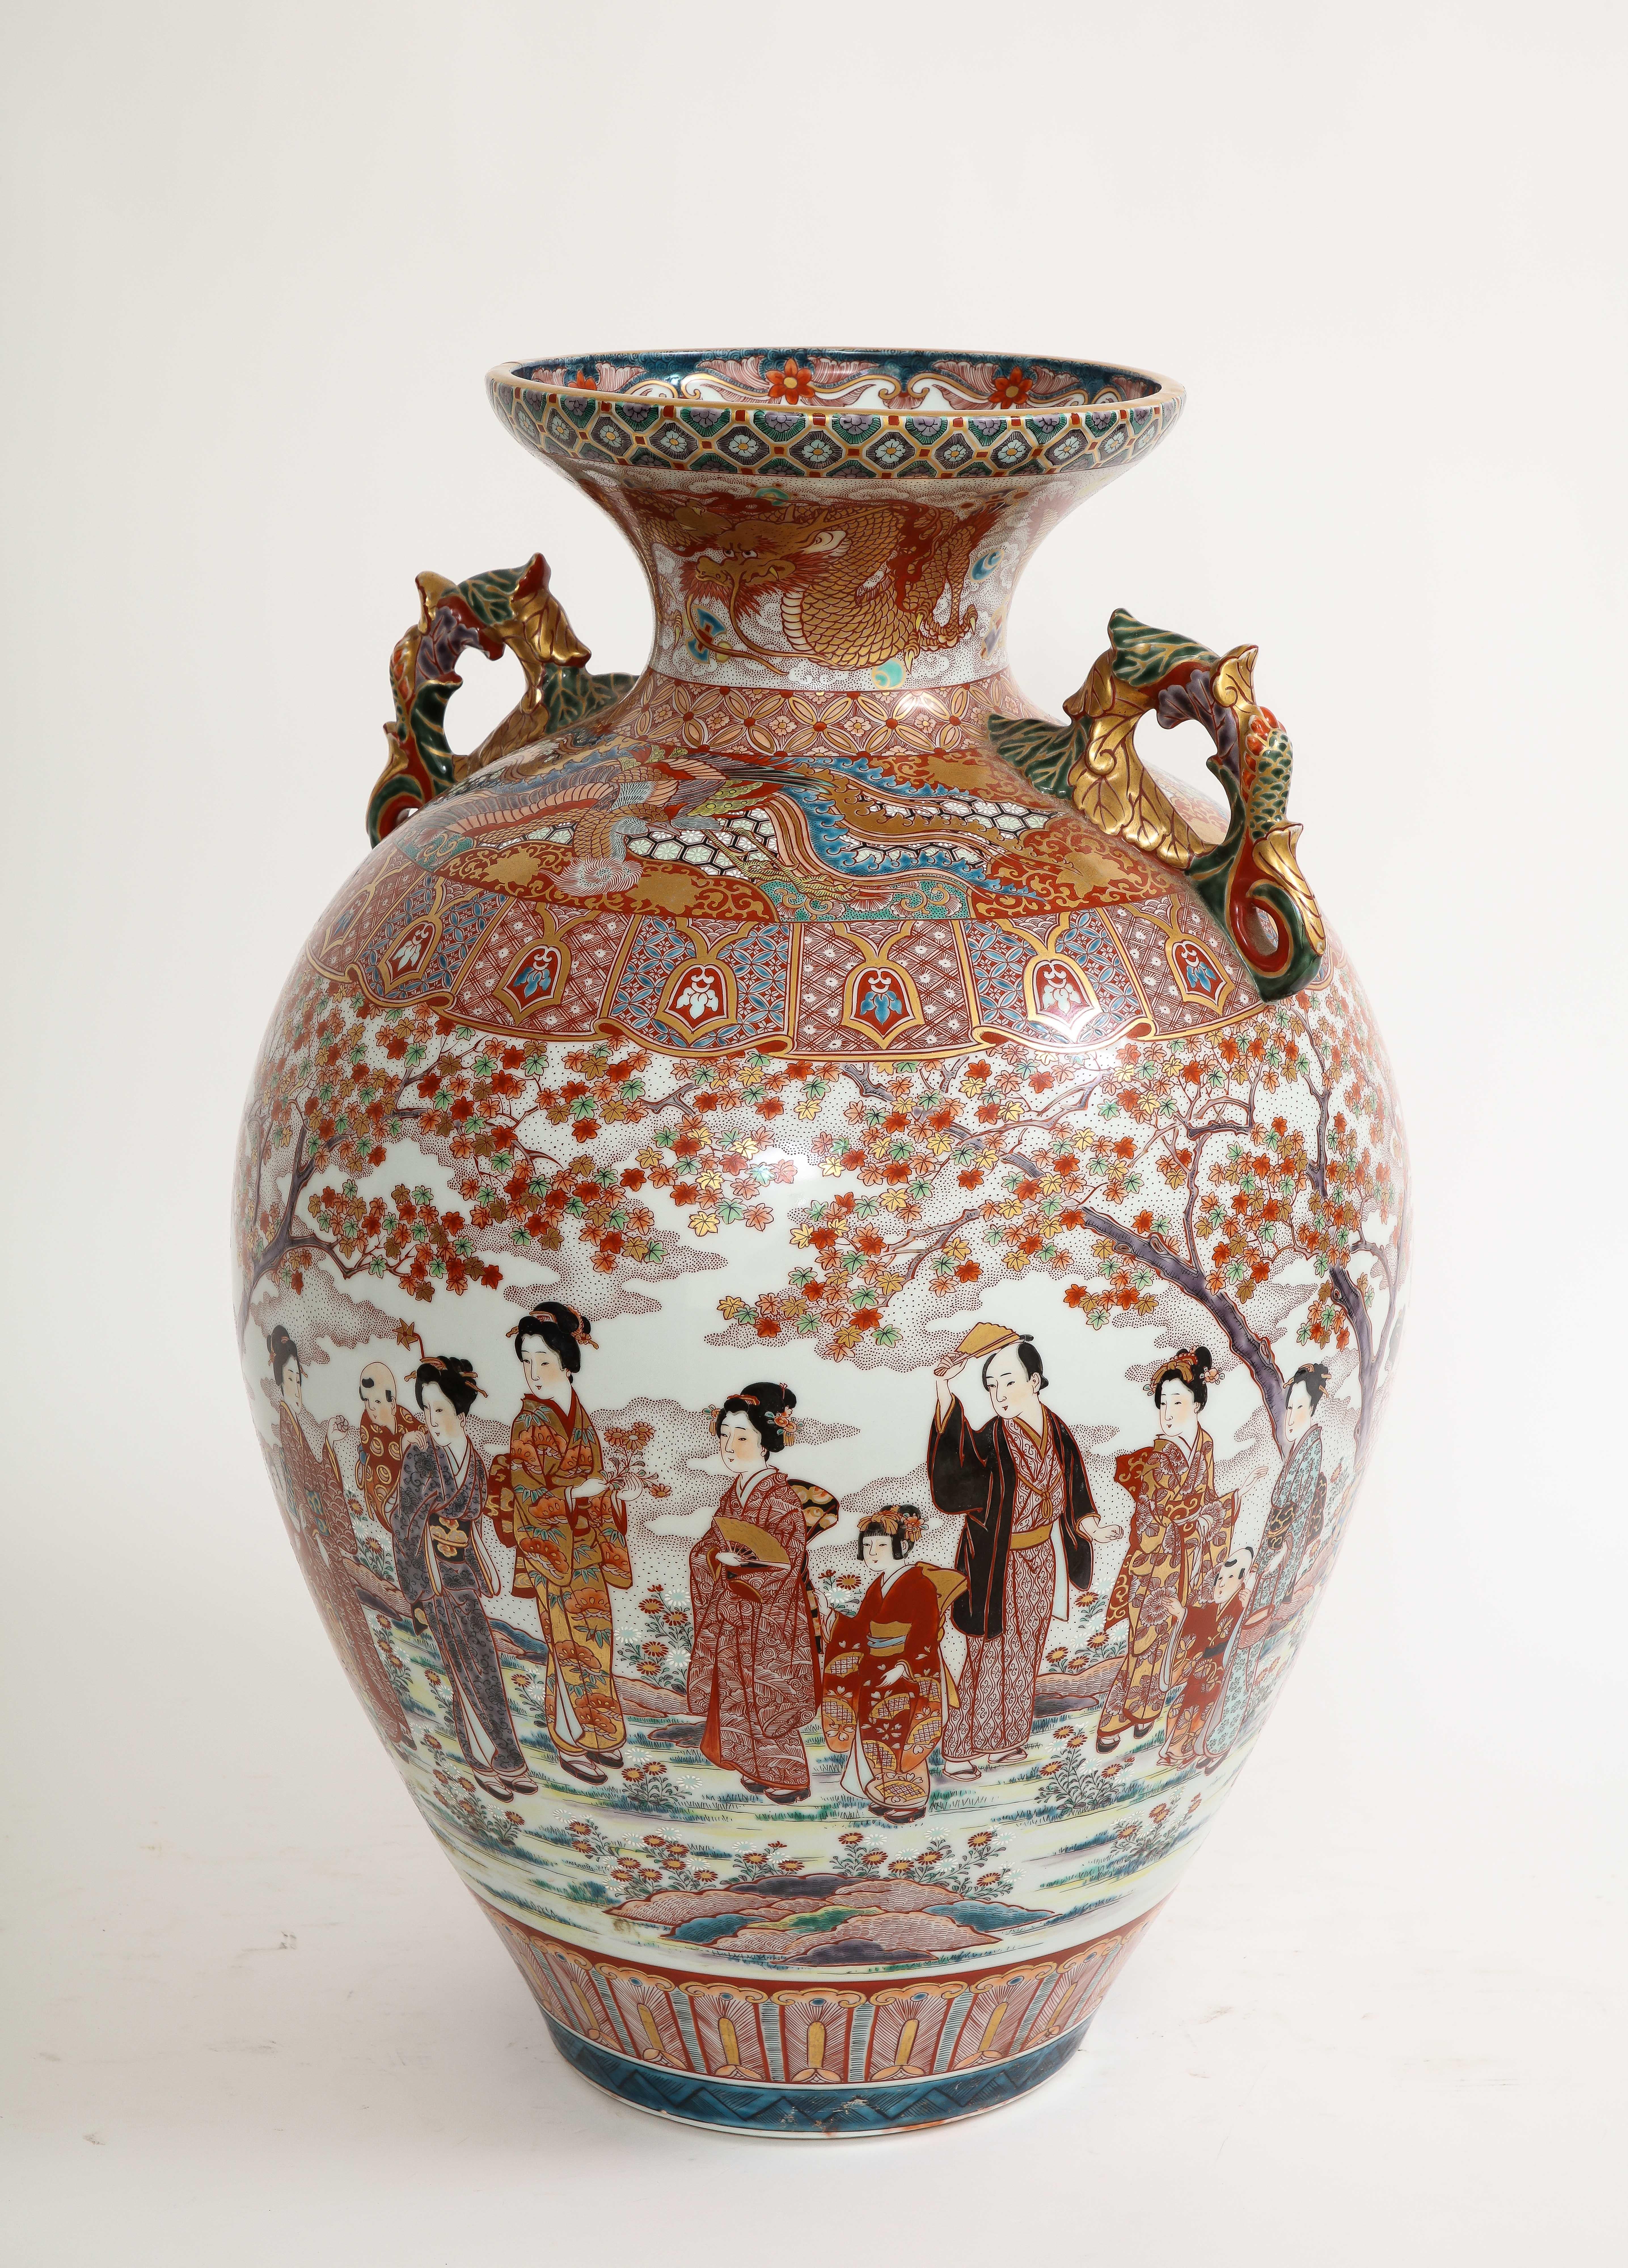 Monumental Japanese Kutani Porcelain Vase, Meiji/Taisho Period, Signed In Good Condition For Sale In New York, NY